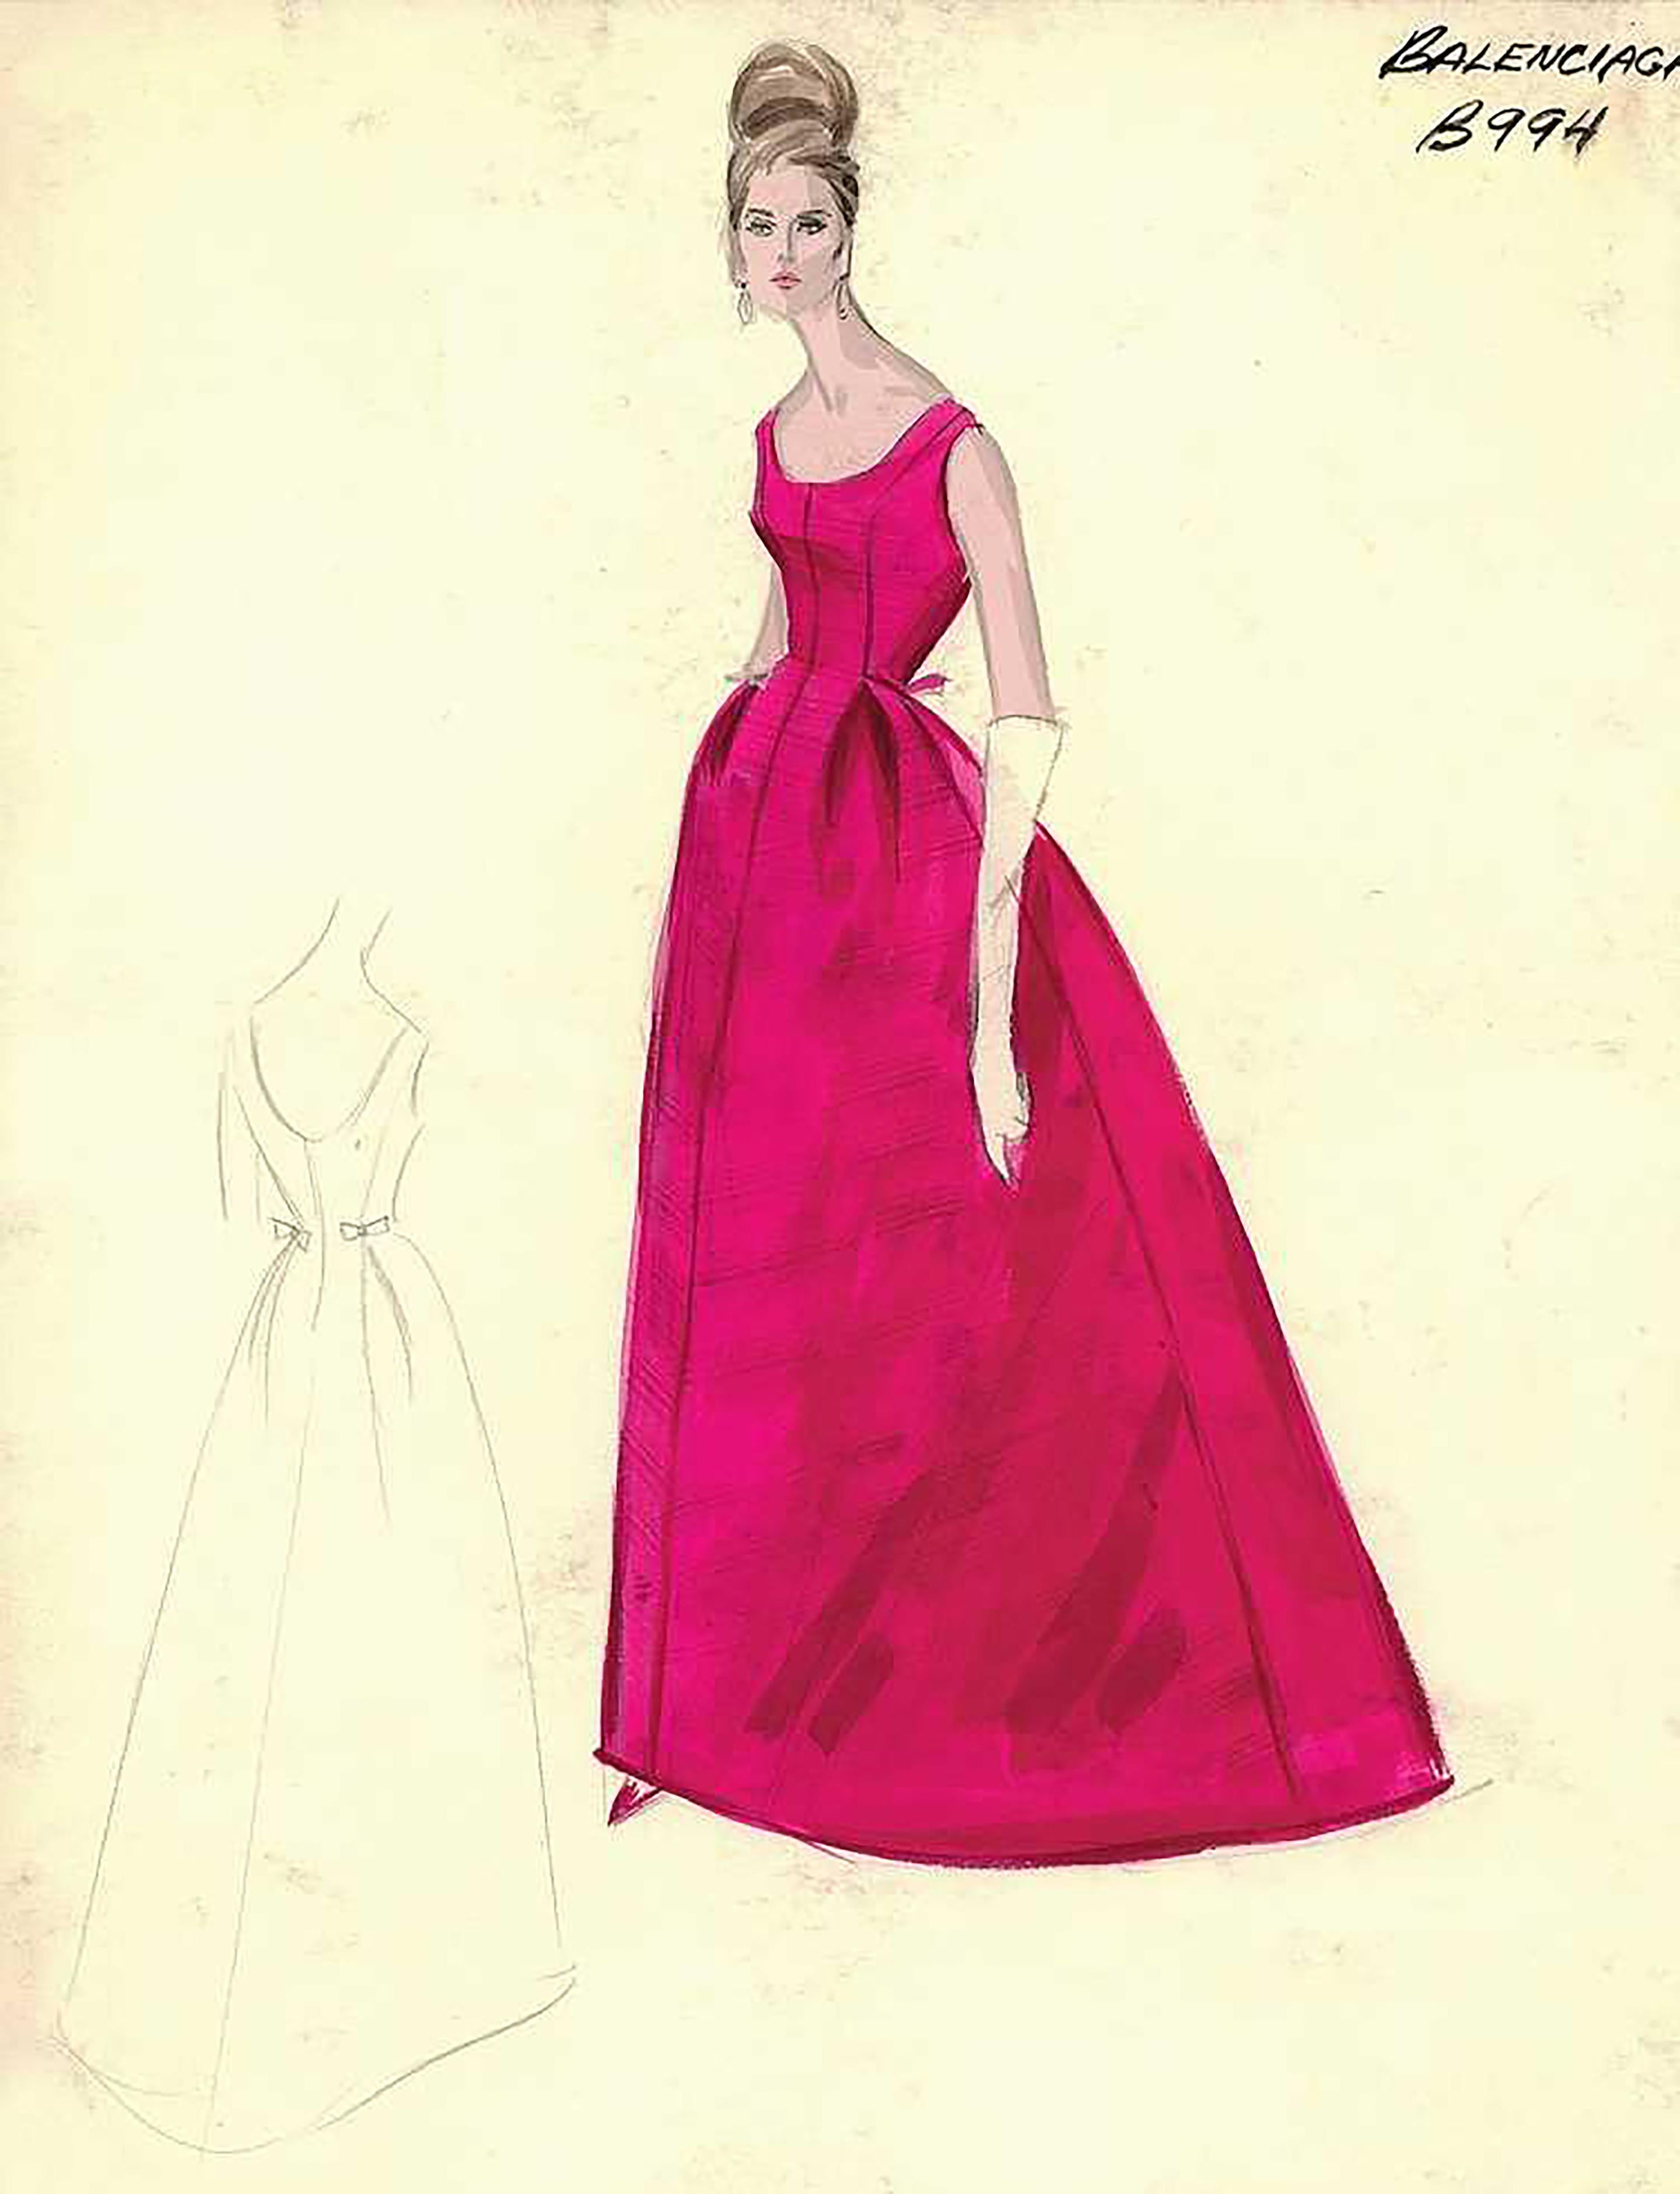 S/S 1964 Balenciaga deep rose pink silk sleeveless gown. Ballgown style sleeveless scoop neck dress with full skirt and small back bow details, with pink organza interior lining. Back zip closure with built-in waist corsetlet. Sketch featured in